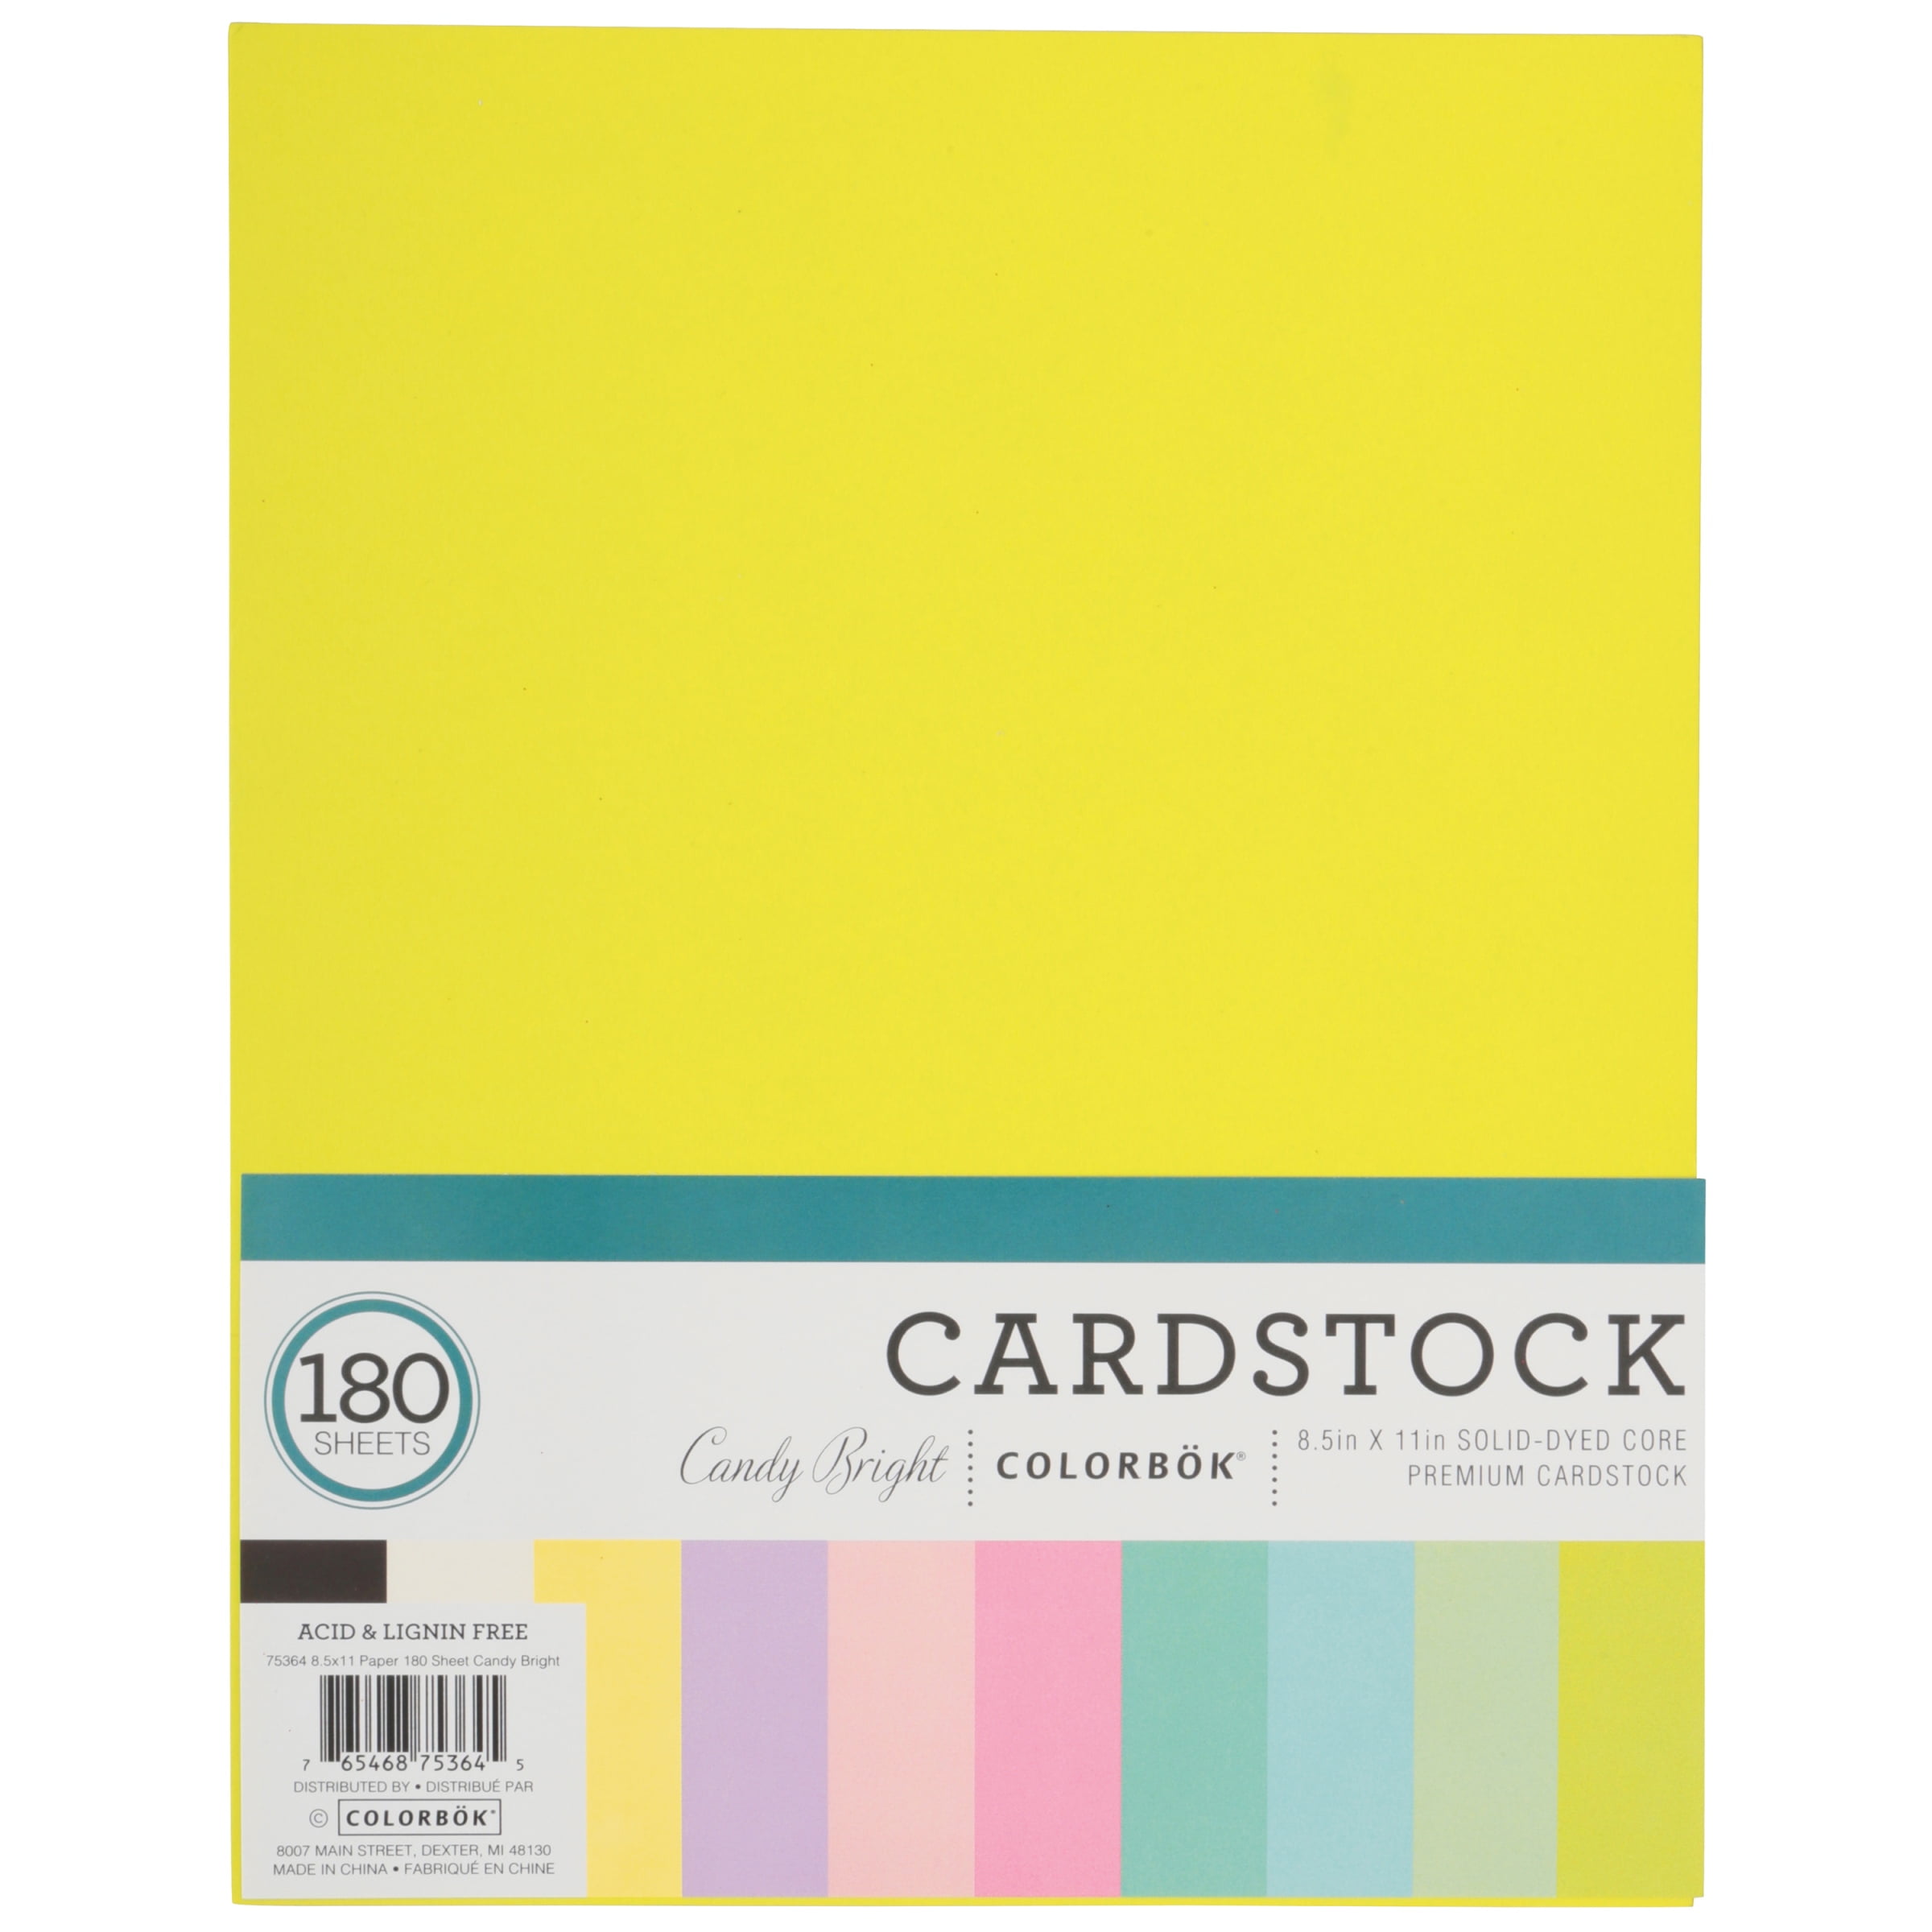 Cardstock Stack Jewels 12X12 58Sh Textured With White Core 